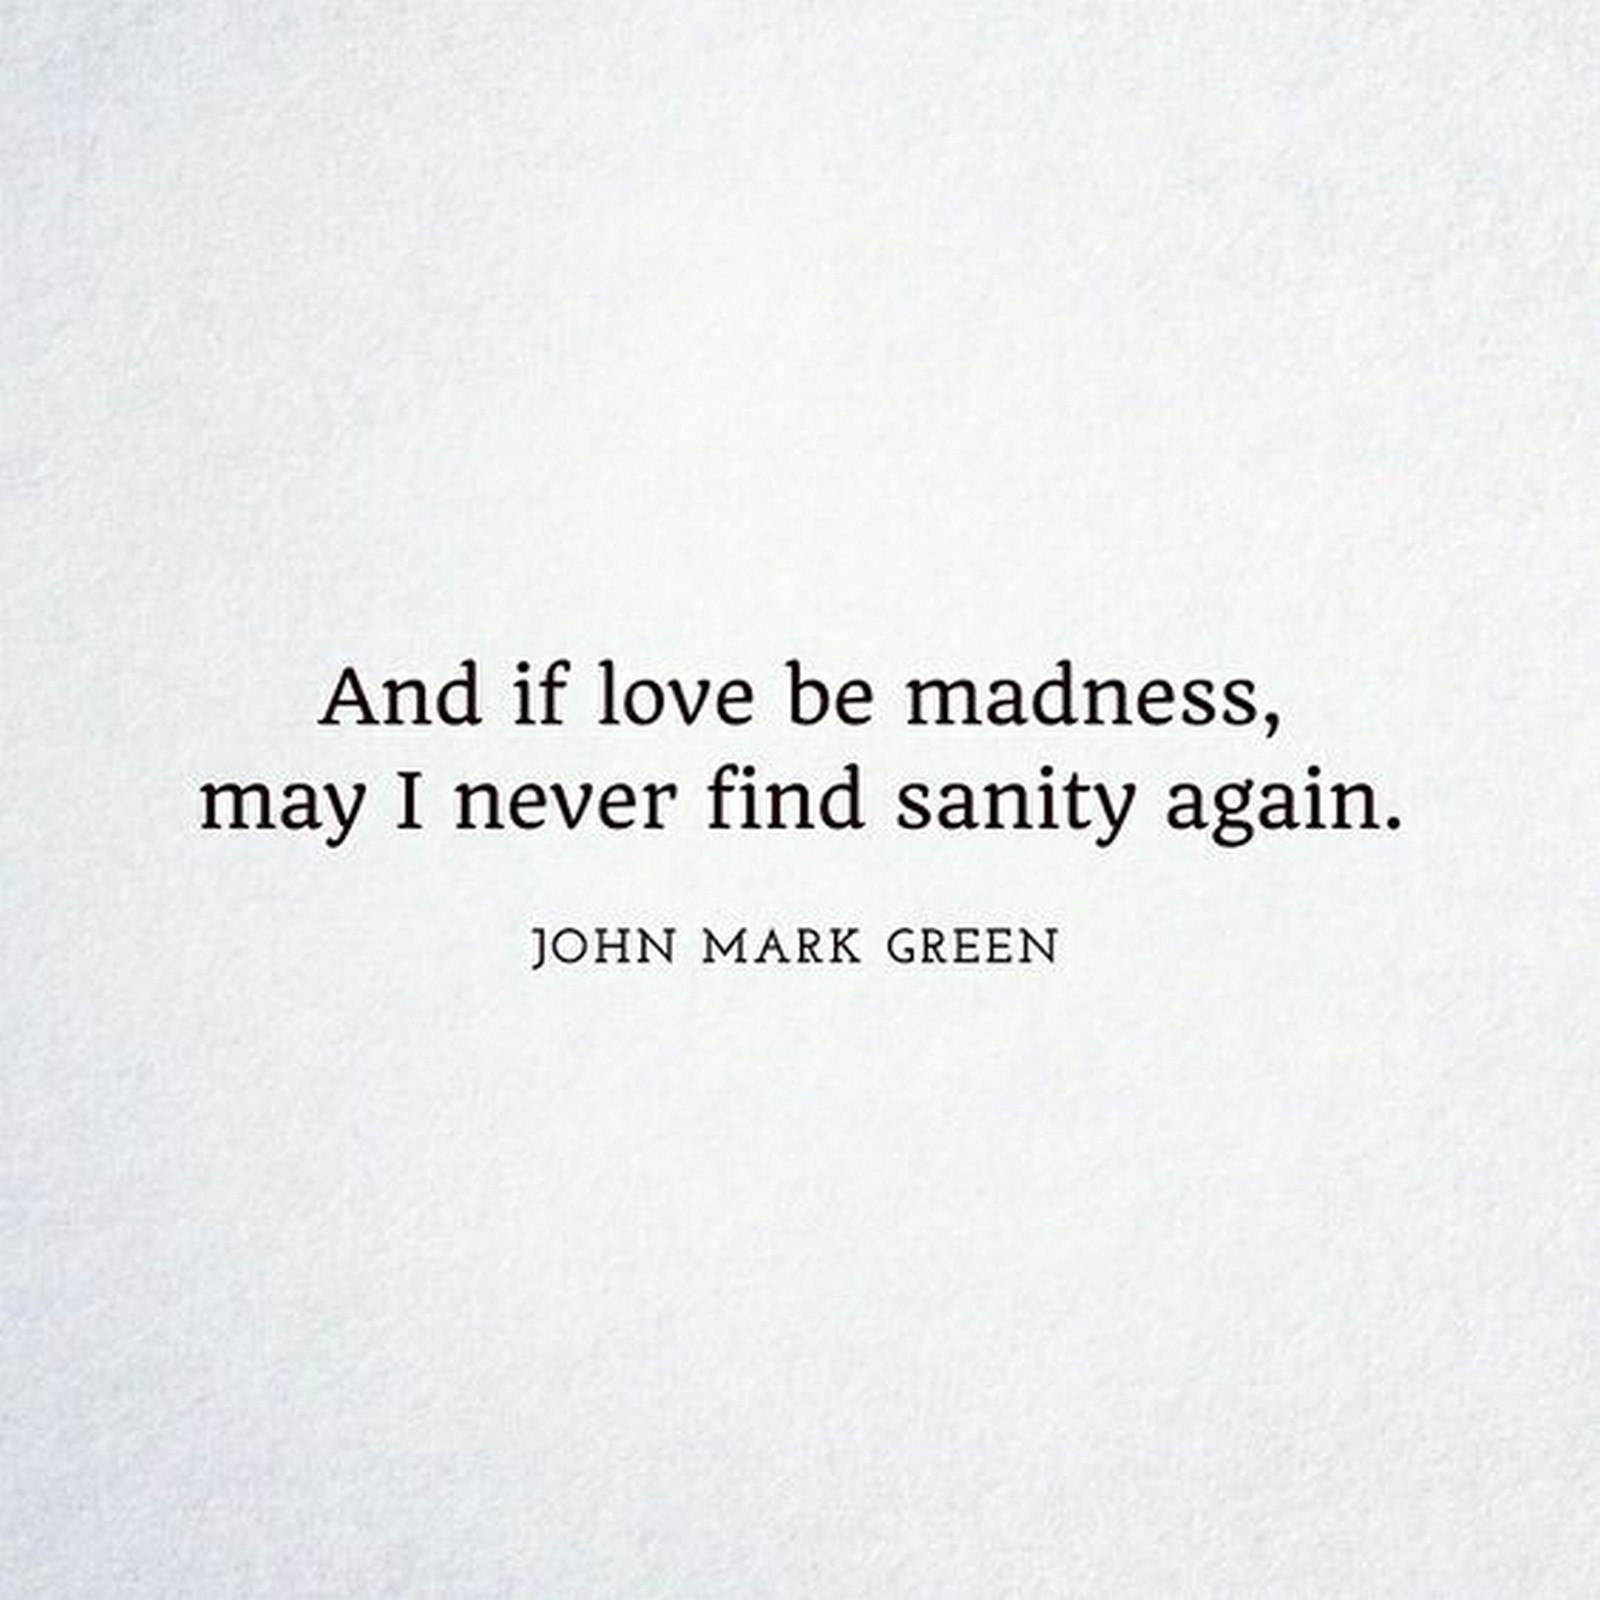 55 Romantic Quotes - "And if love be madness, may I never find sanity again." - John Mark Green